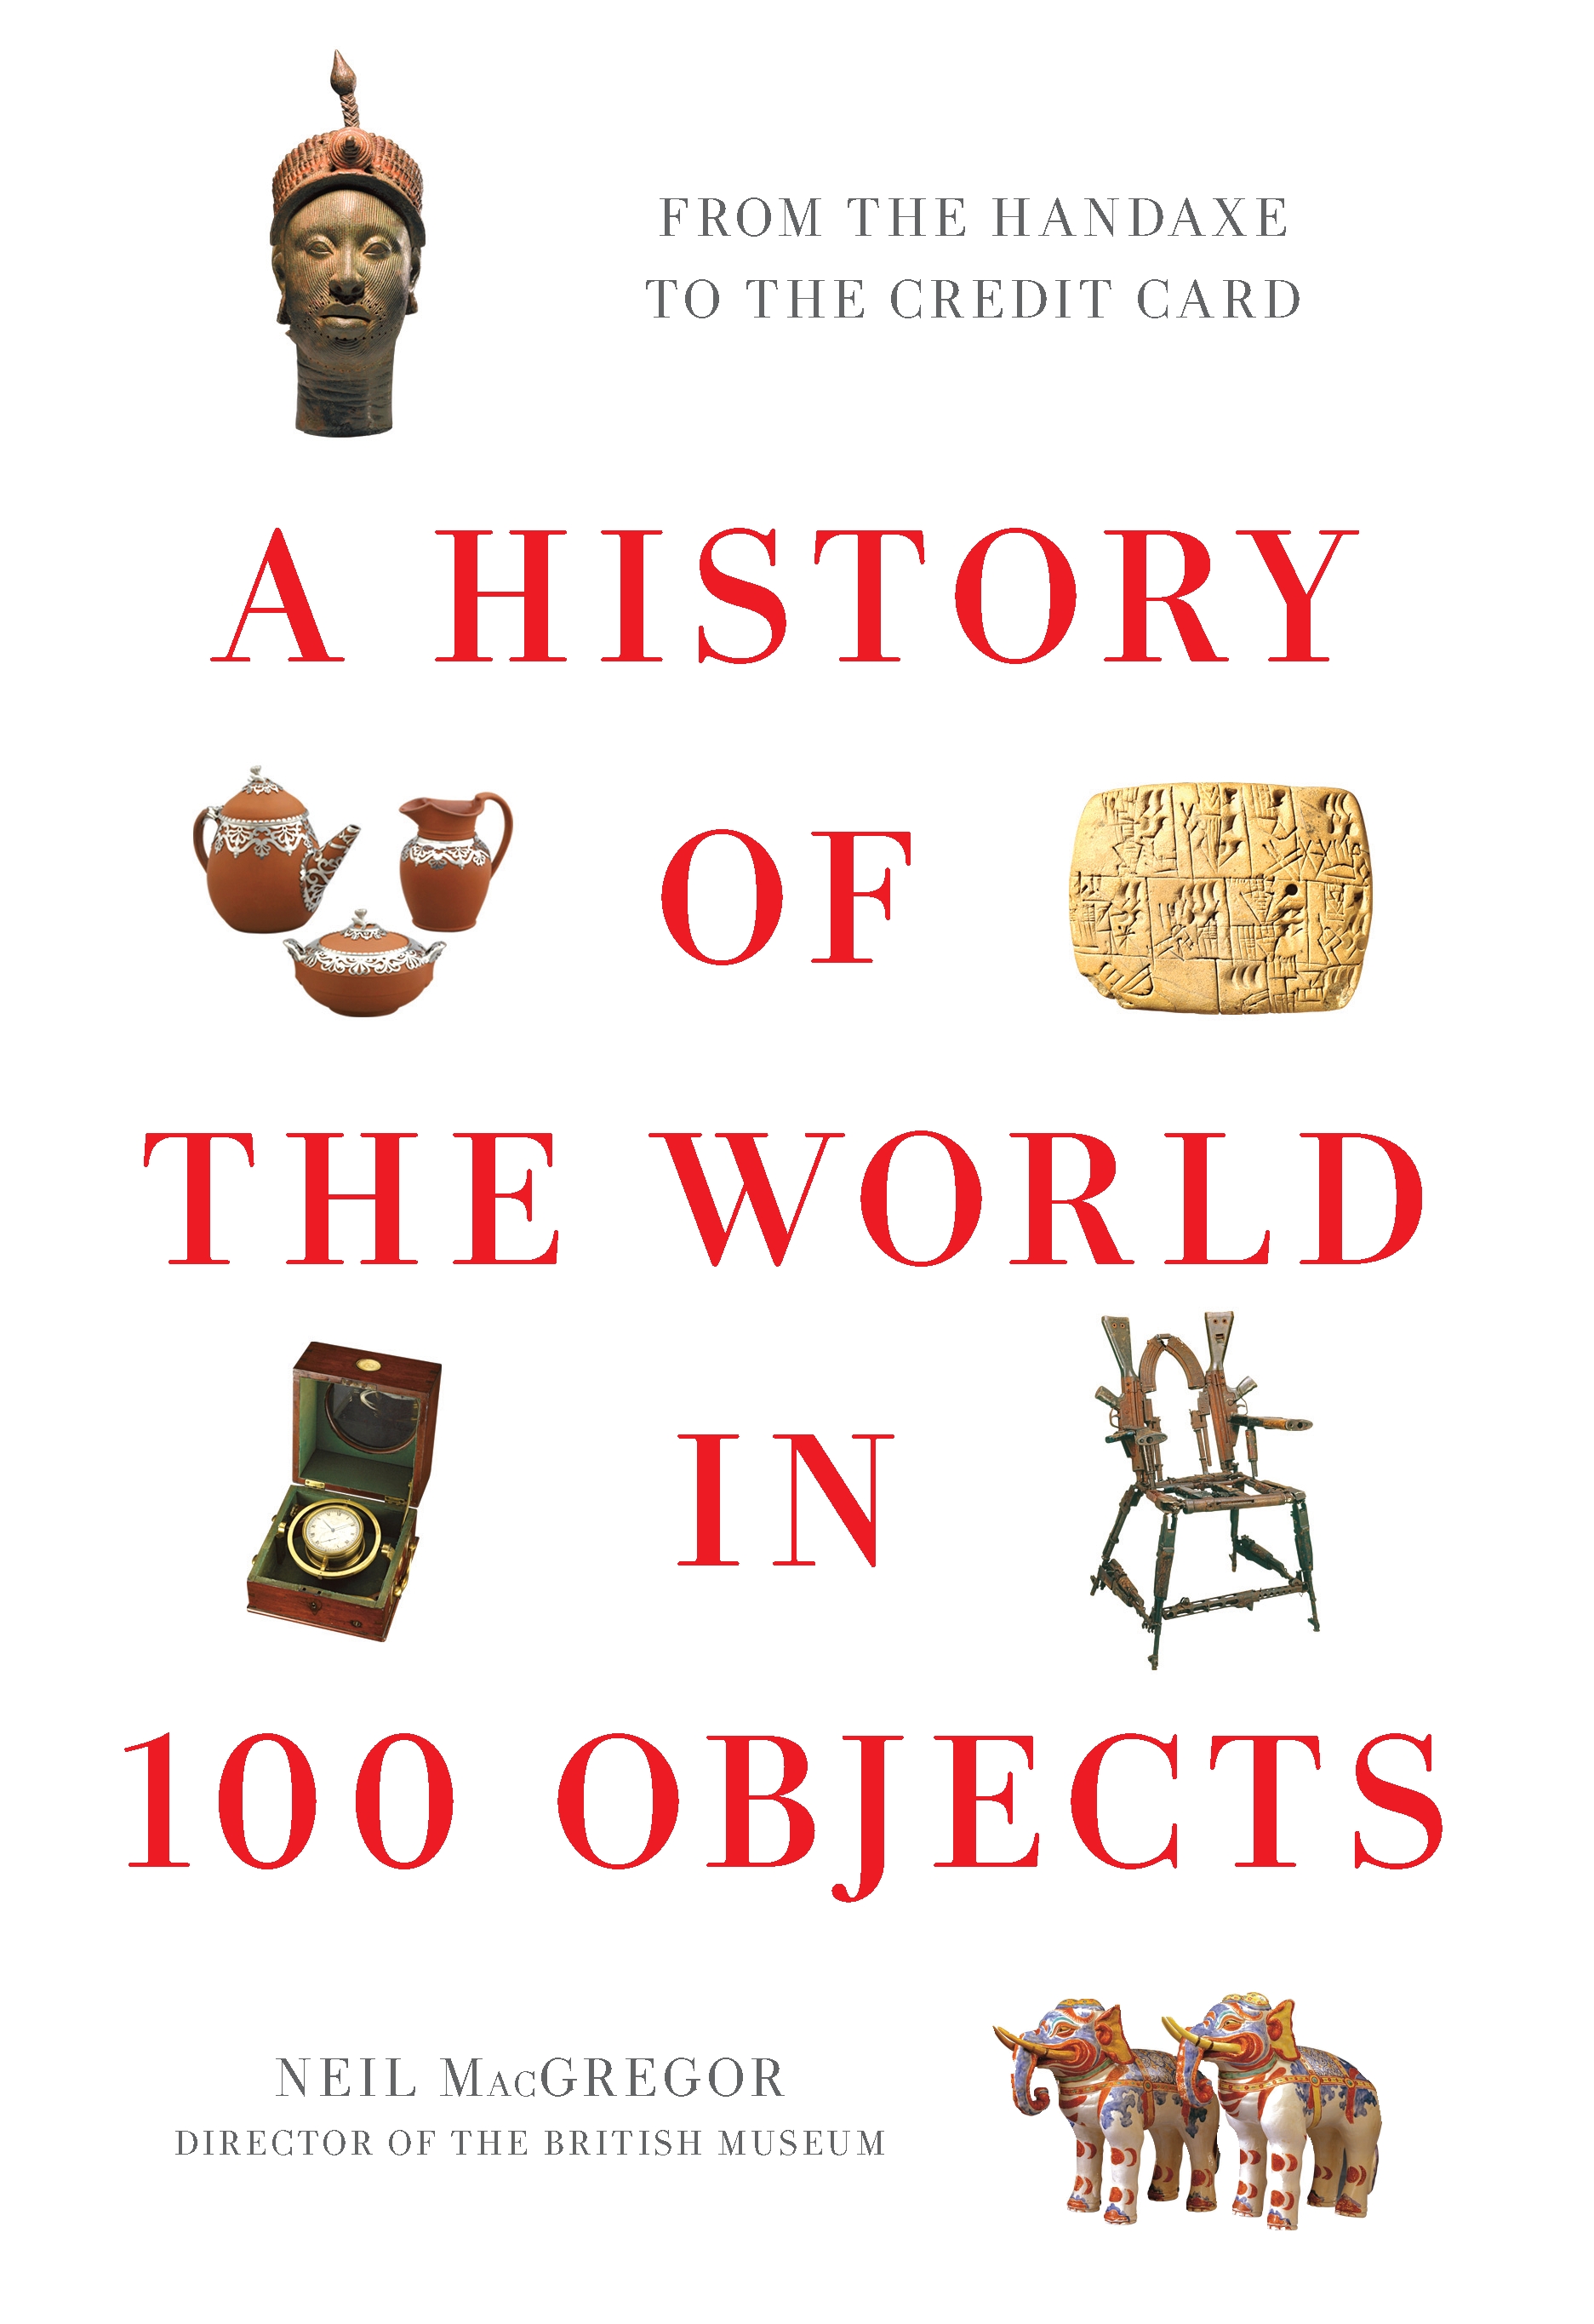 100 objects. The History of the World in 100 objects. World History. A History of the World in 100 objects by Neil MACGREGOR. История книги.